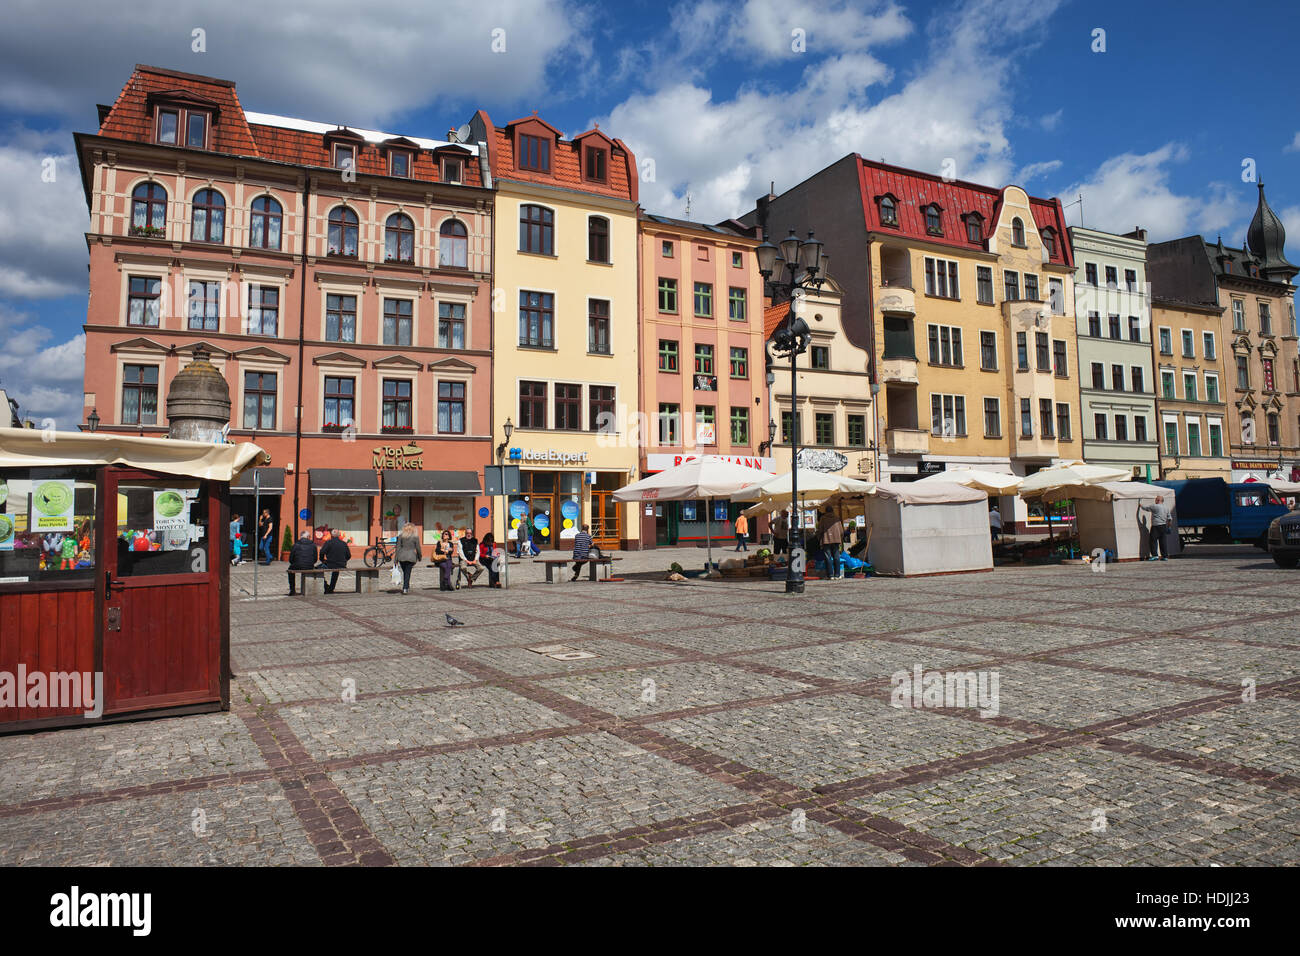 Historic houses at New Town Square in Torun, Poland Stock Photo